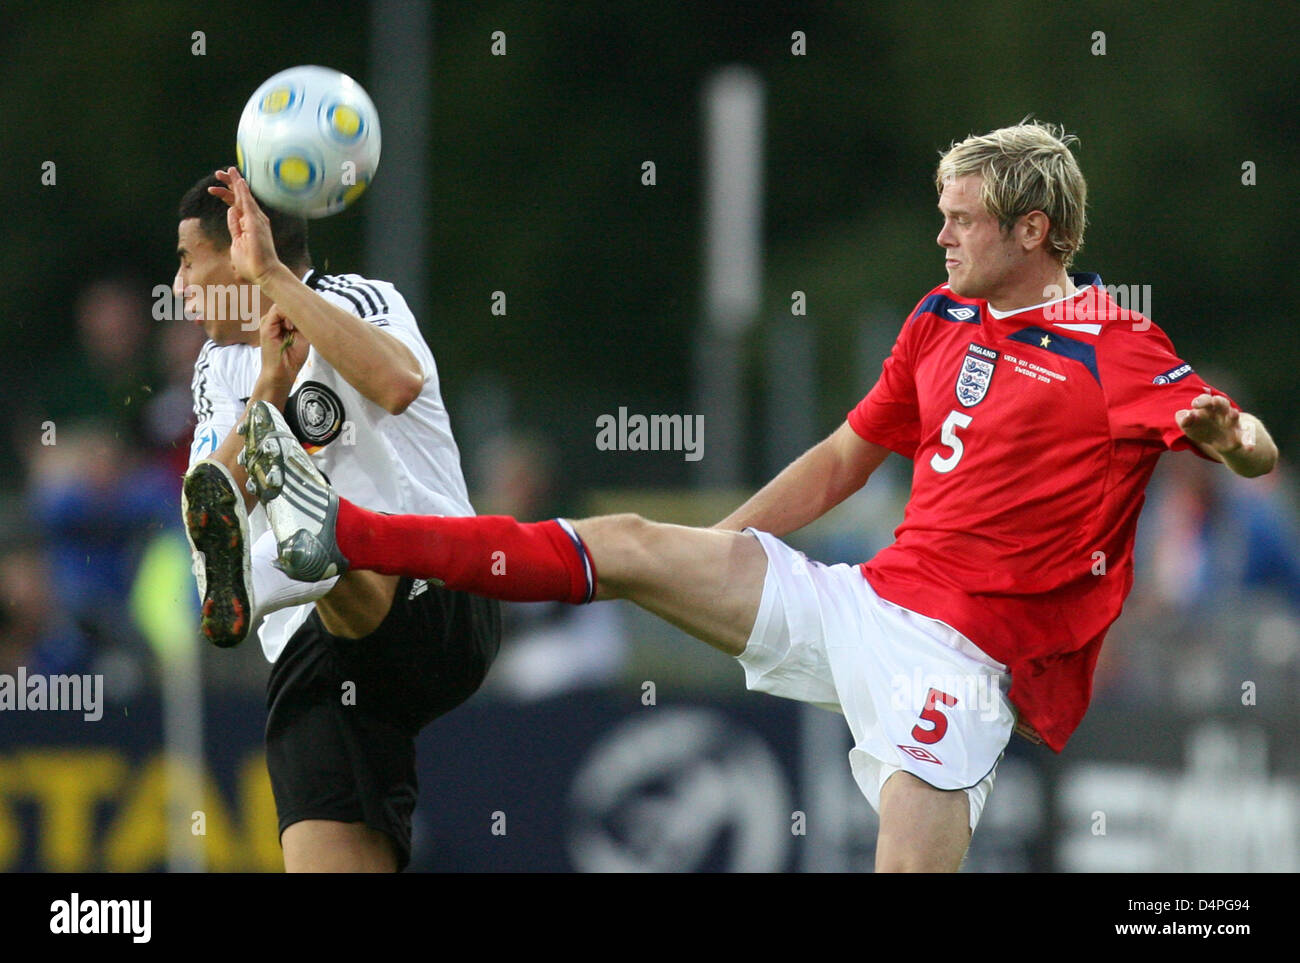 Germany?s Aenis Ben-Hatira (L) and England?s Richard Stearman (R) vie for the ball during the UEFA Under21 Championships group B match Germany v England at Orjans Vall stadium in Halmstad, Sweden, 22 June 2009. The match ended in a 1-1 draw, both sides move up to semi-finals. Photo: Friso Gentsch Stock Photo